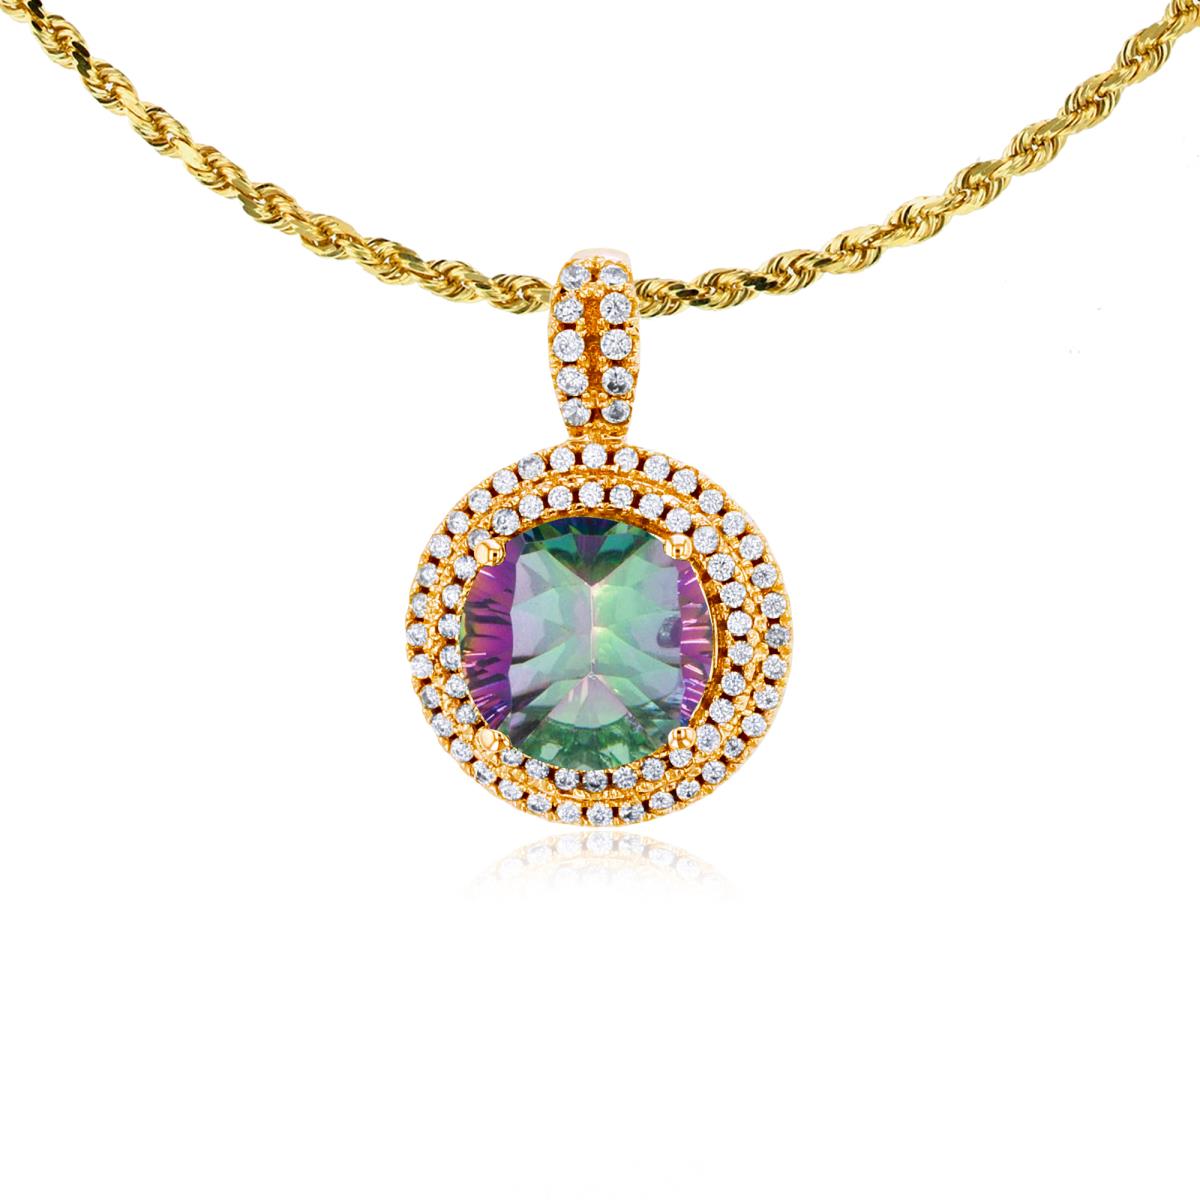 10K Yellow Gold 7mm Round Mystic Green Quartz & 0.25 CTTW Diamonds Double Halo 18" Rope Chain Necklace